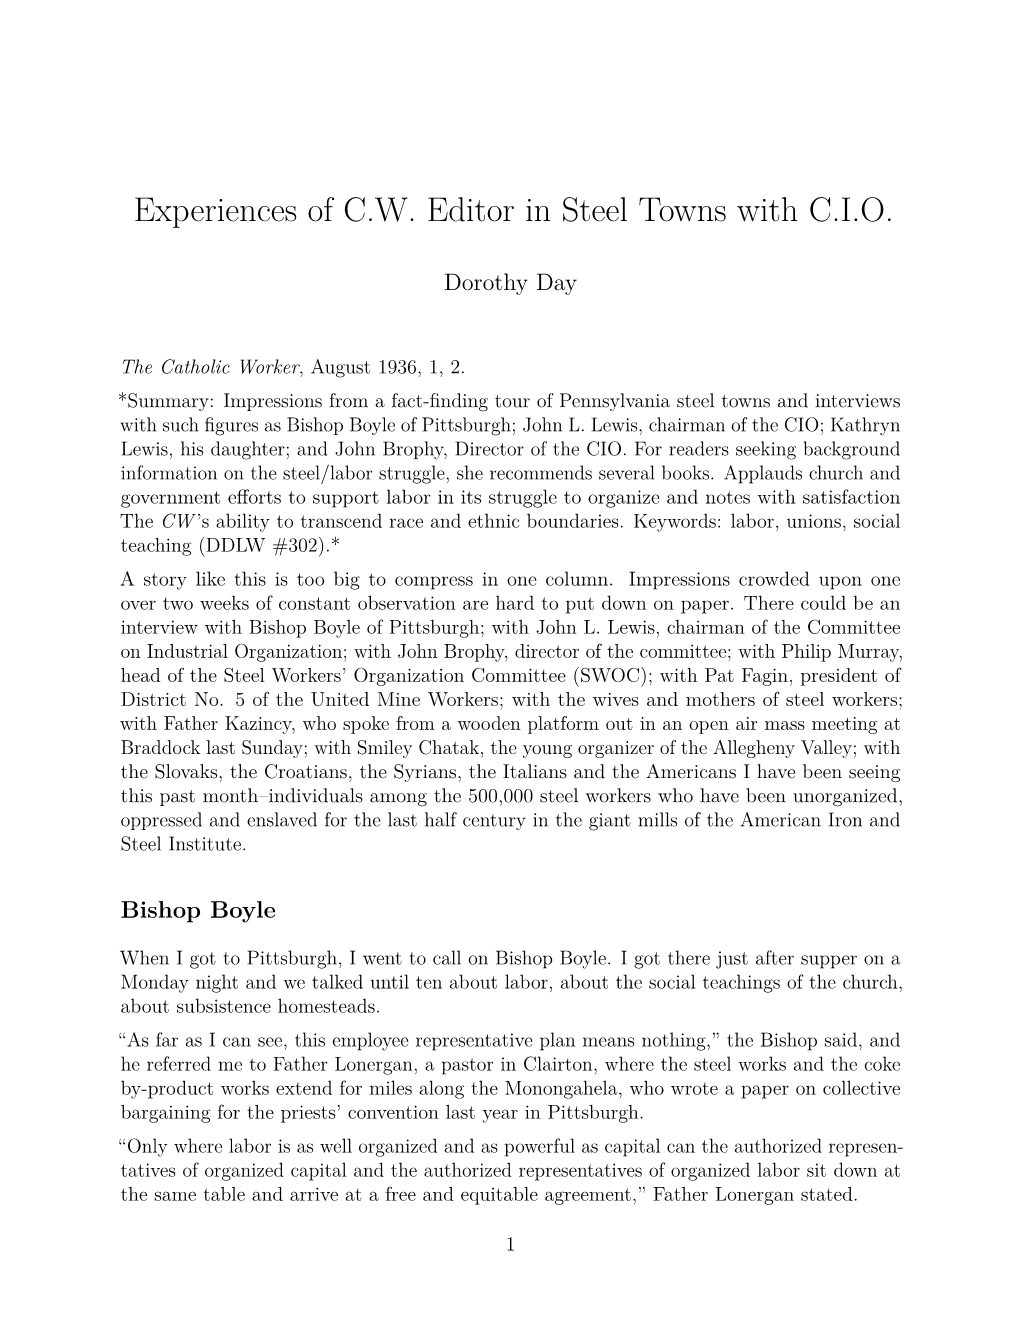 Experiences of C.W. Editor in Steel Towns with C.I.O